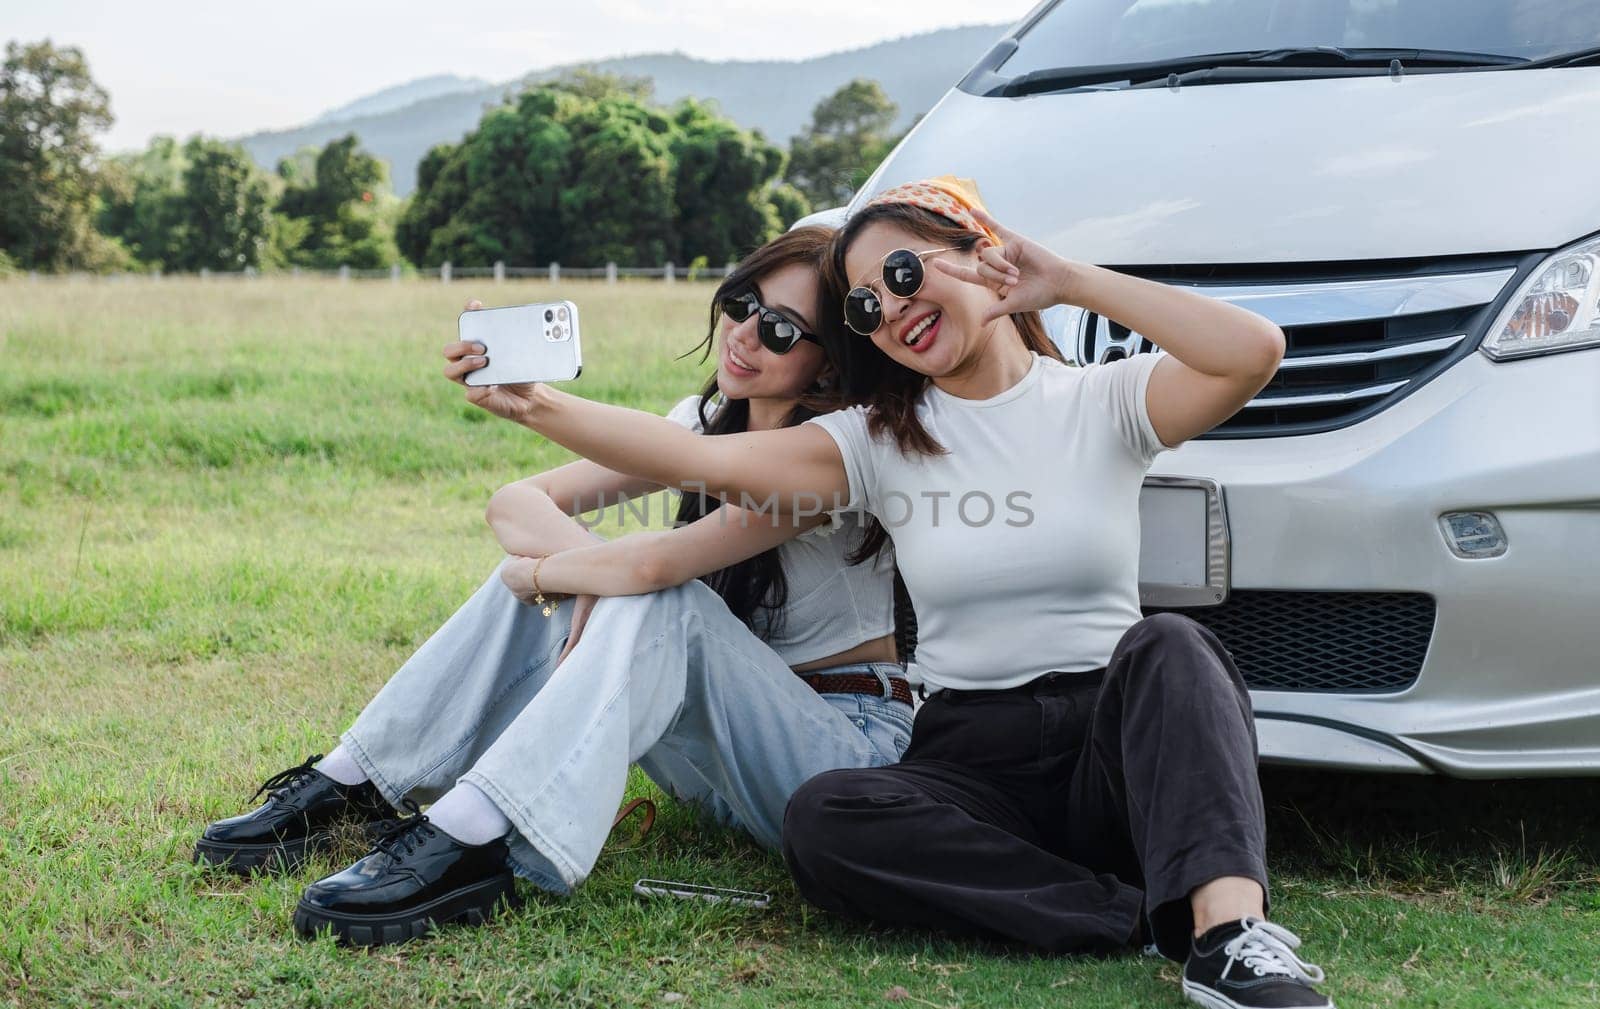 A young lesbian couple enjoyed driving out to see nature and taking picture together..